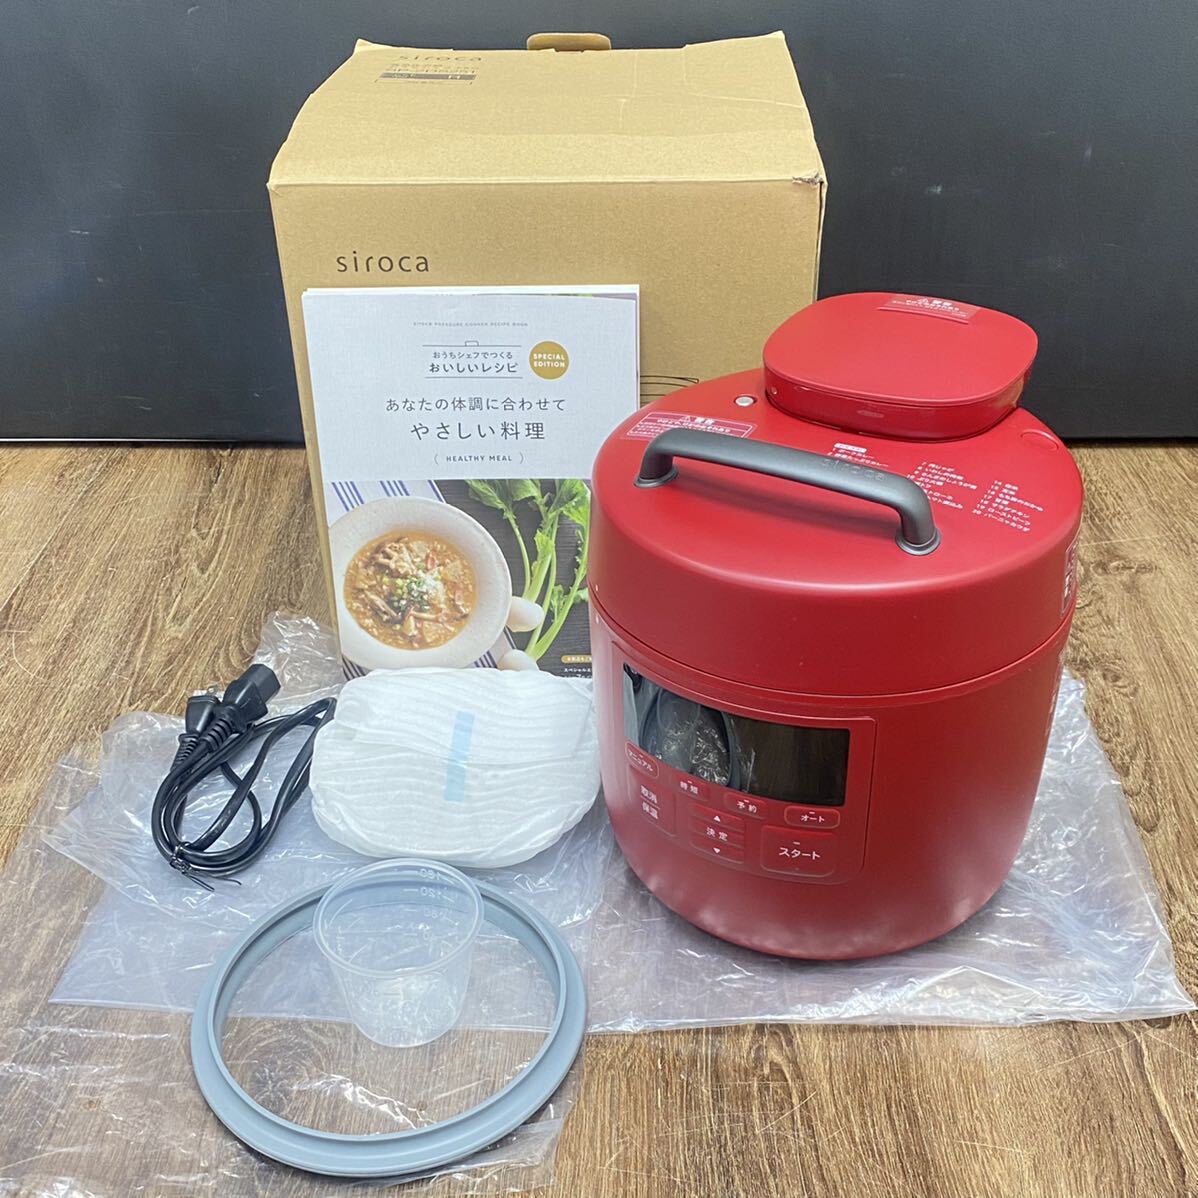  unused goods /2022 year made #2.4 ten thousand regular goods electric pressure cooker ...shefPRO red cooking capacity 1.68L siroca white kaSP-2DS251# Hyogo prefecture Himeji city departure J1